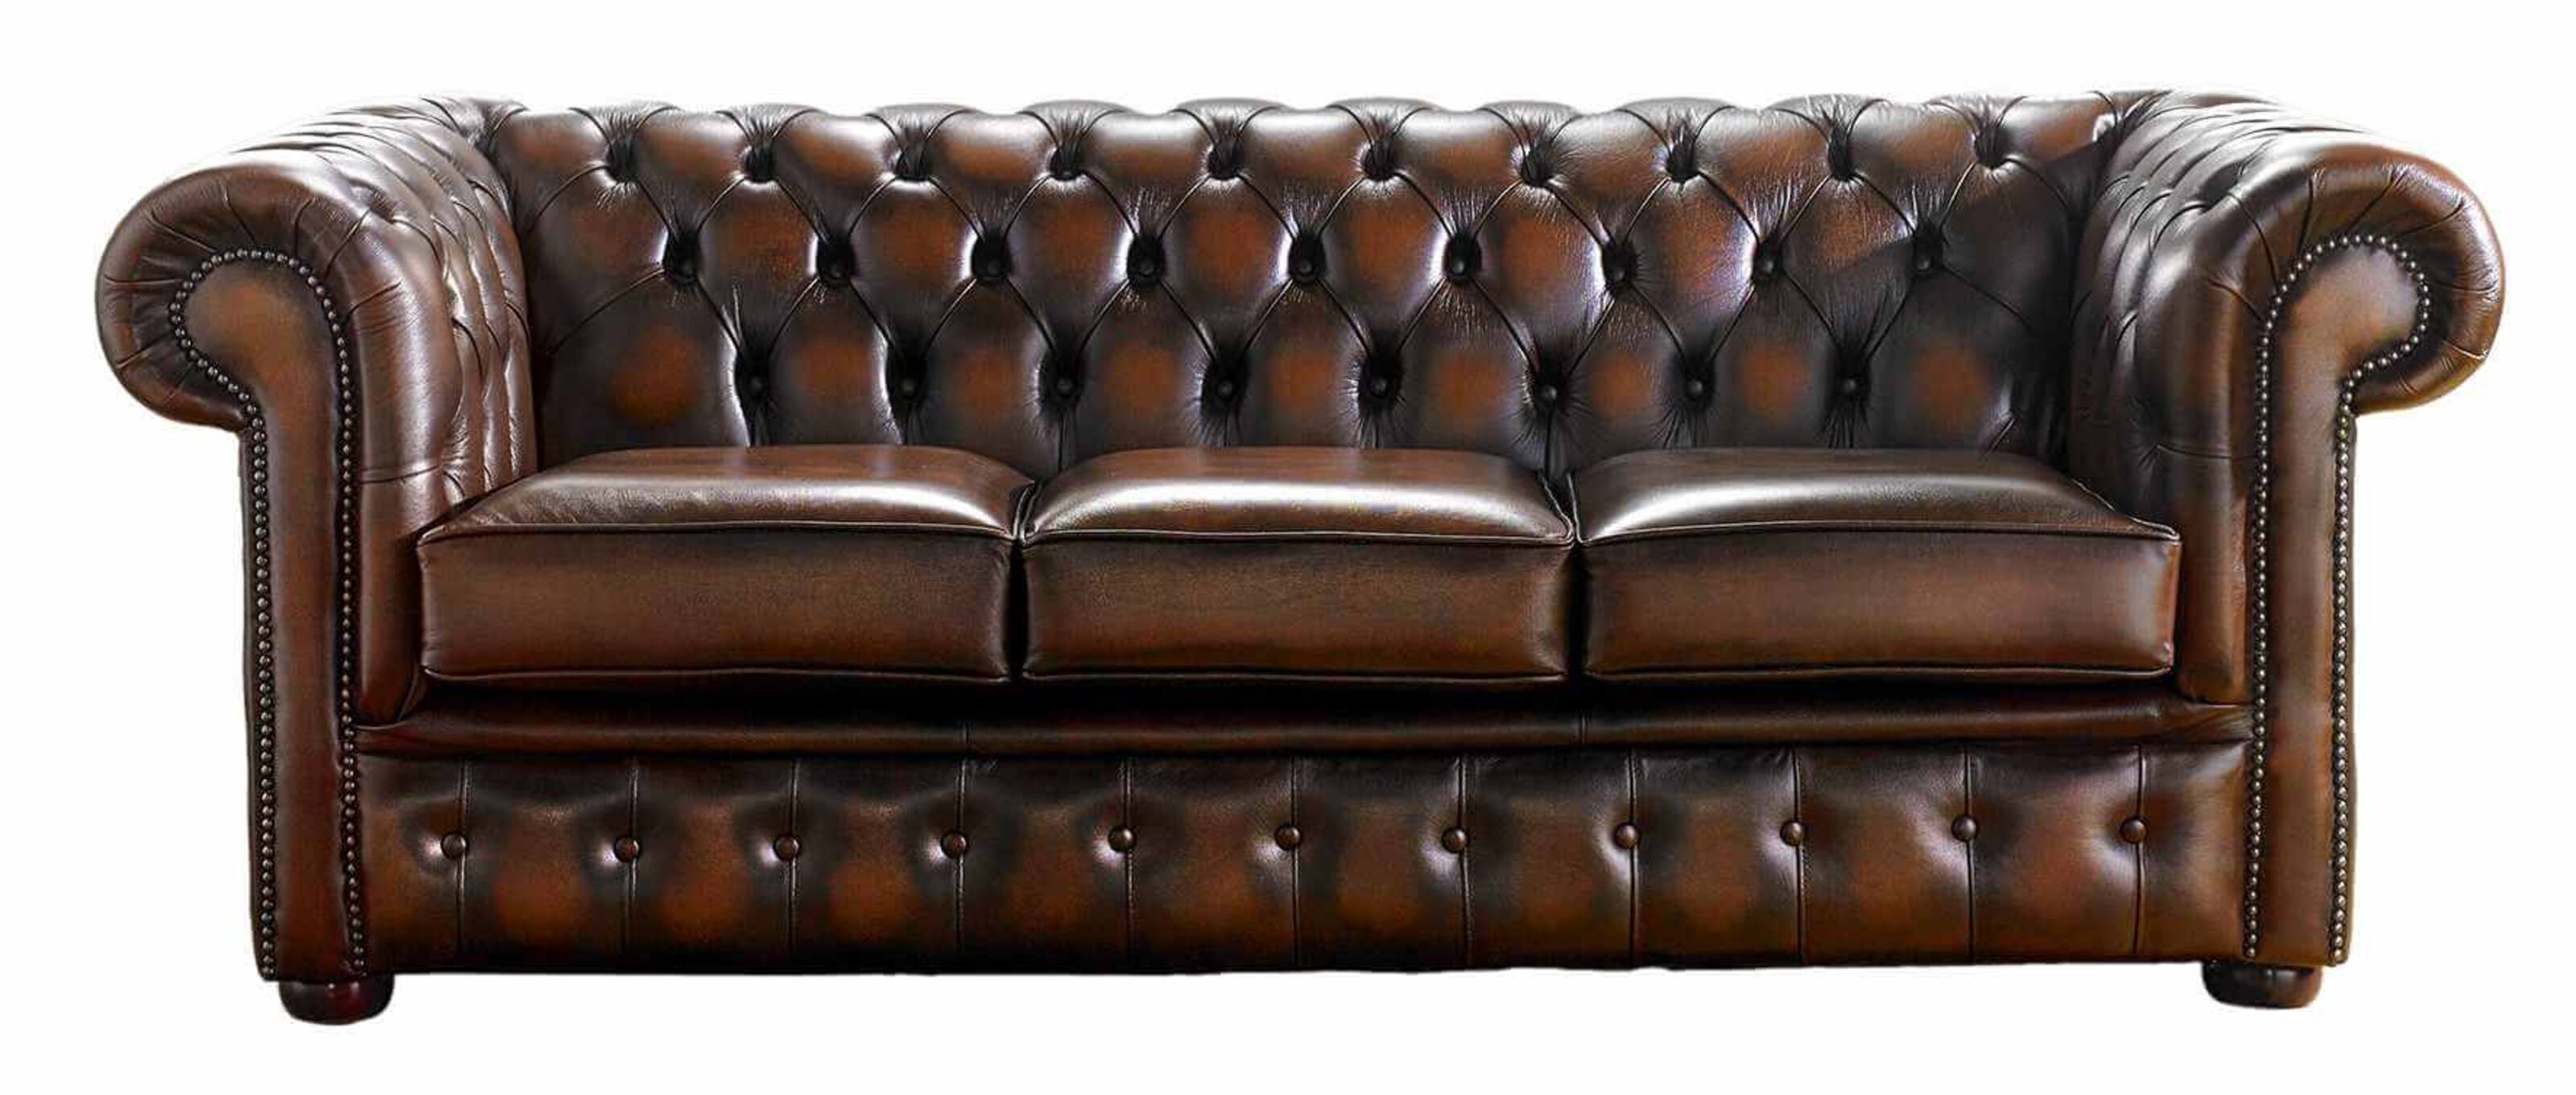 Chesterfield Sofas on Jiji Stylish and Comfortable  %Post Title